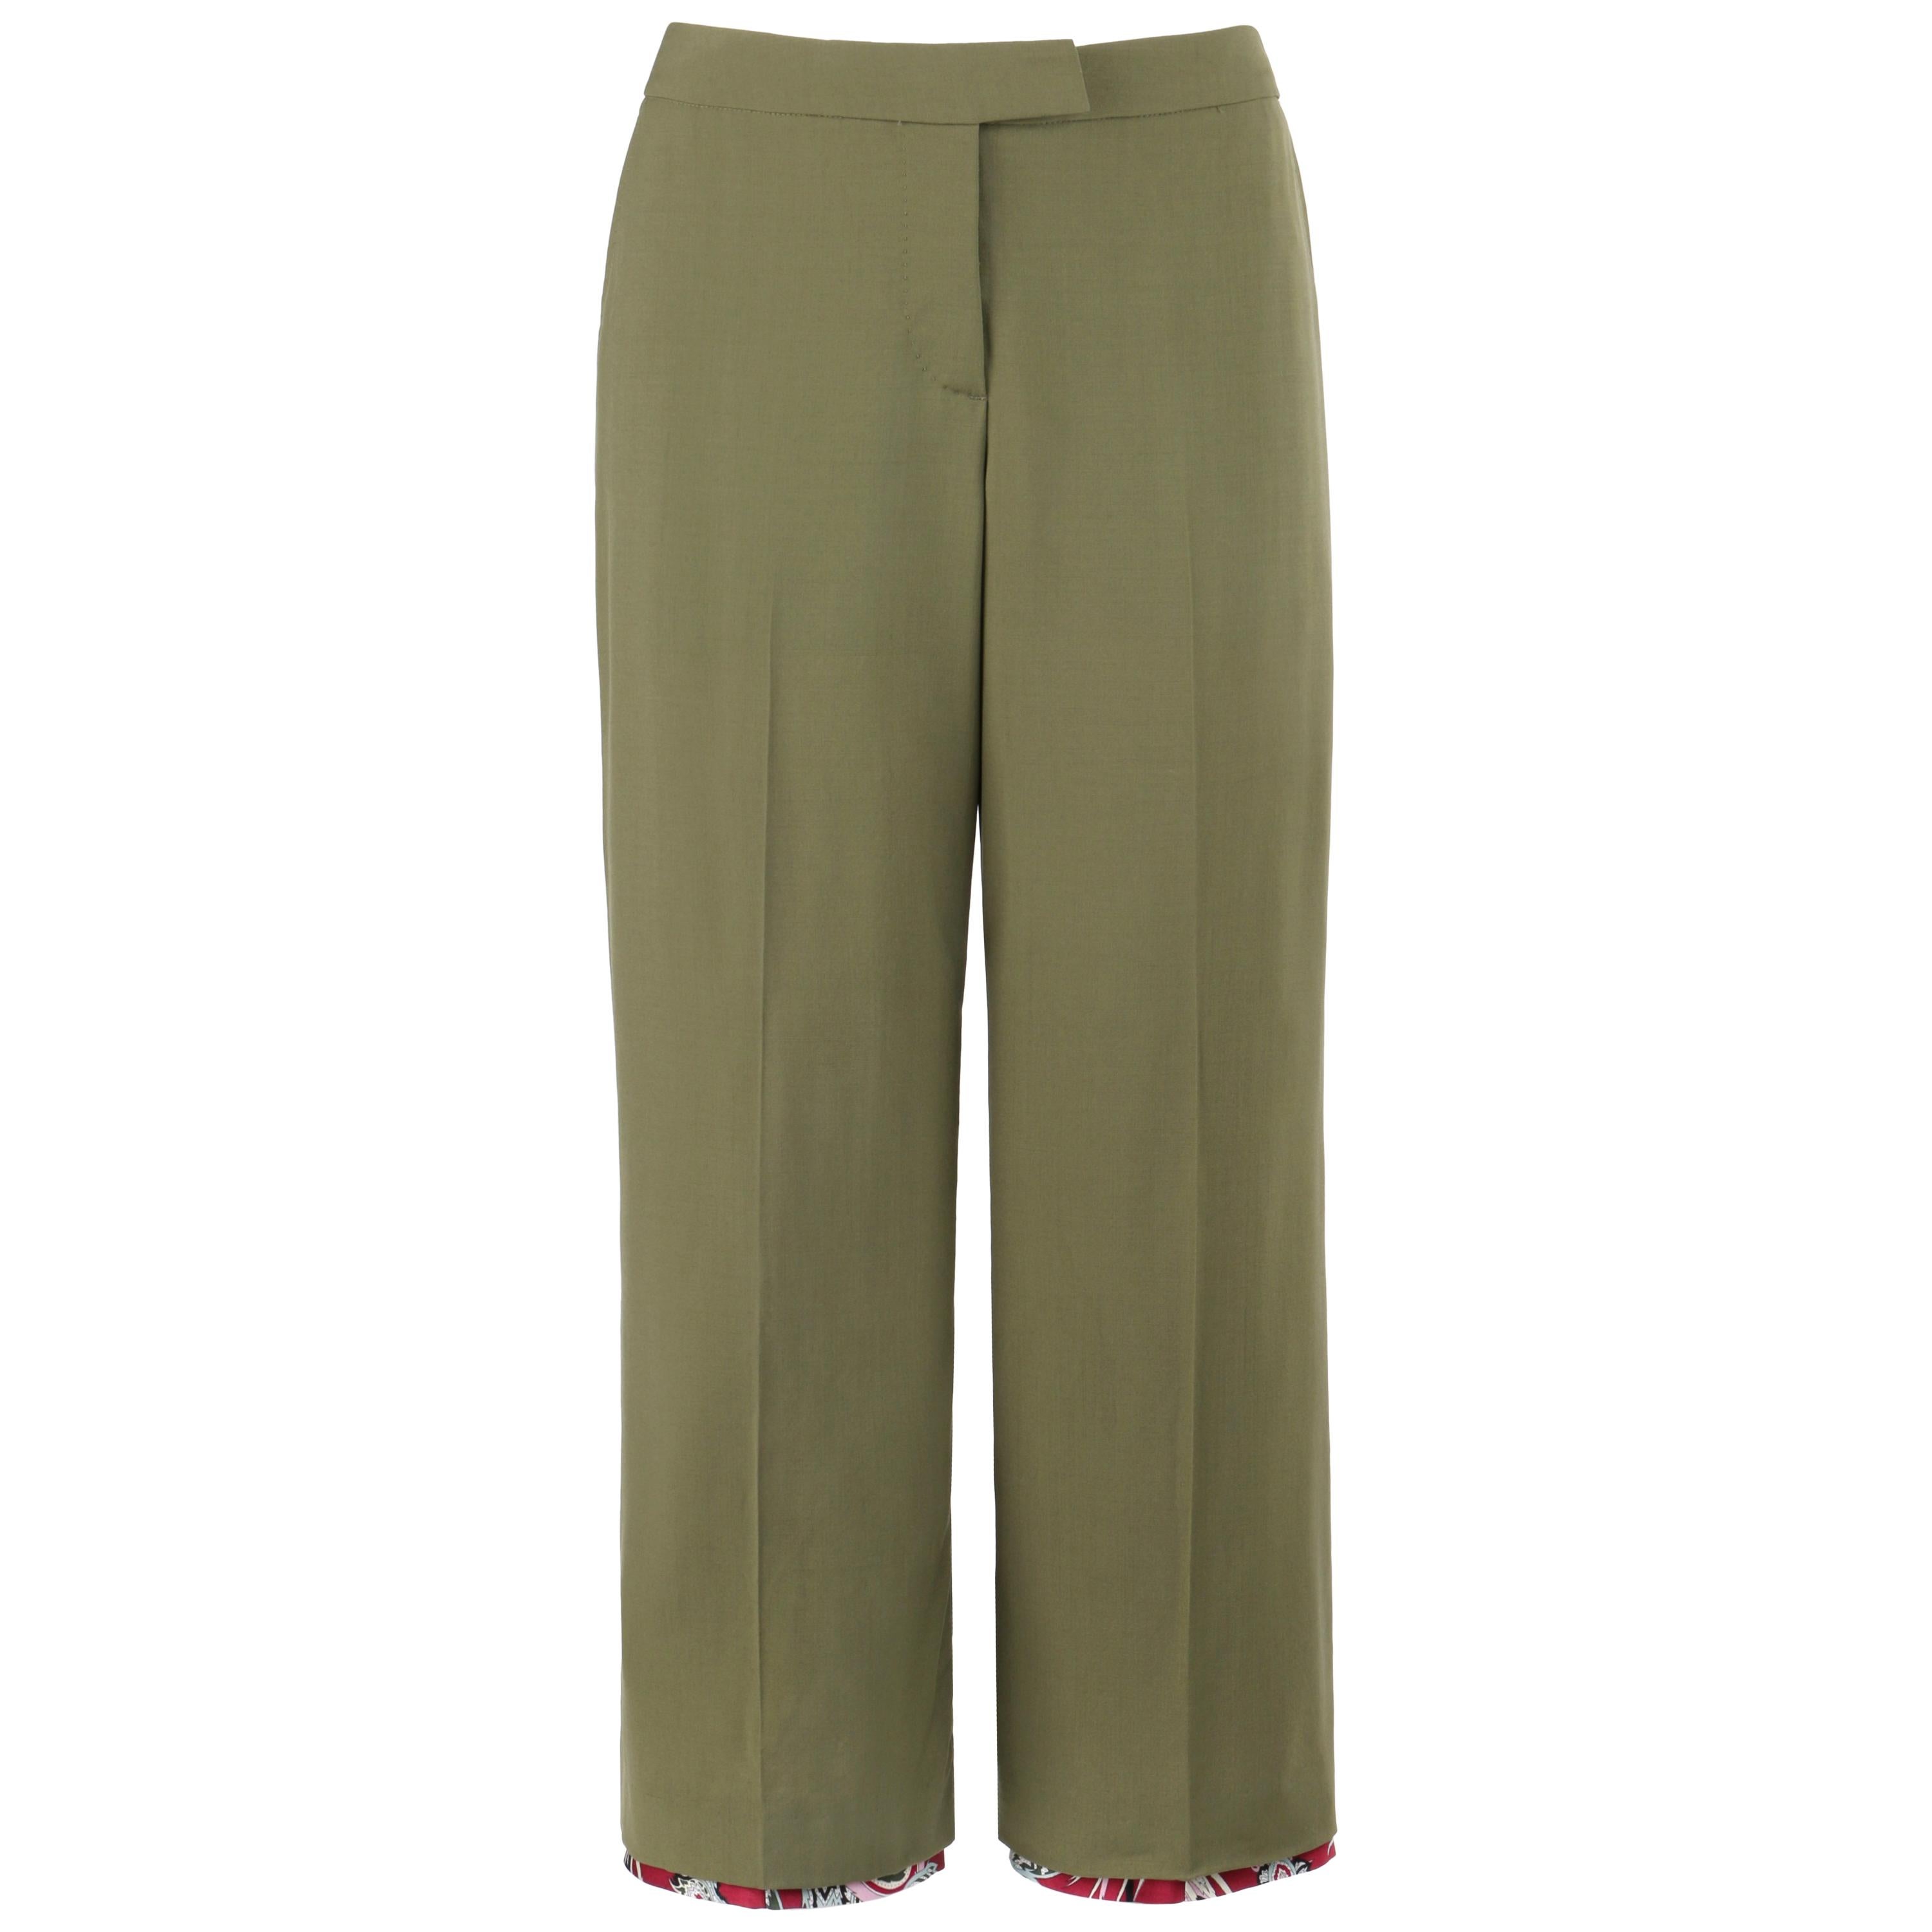 ALEXANDER McQUEEN S/S 2001 "Voss" Olive Green Cropped Capri Trousers Pants For Sale